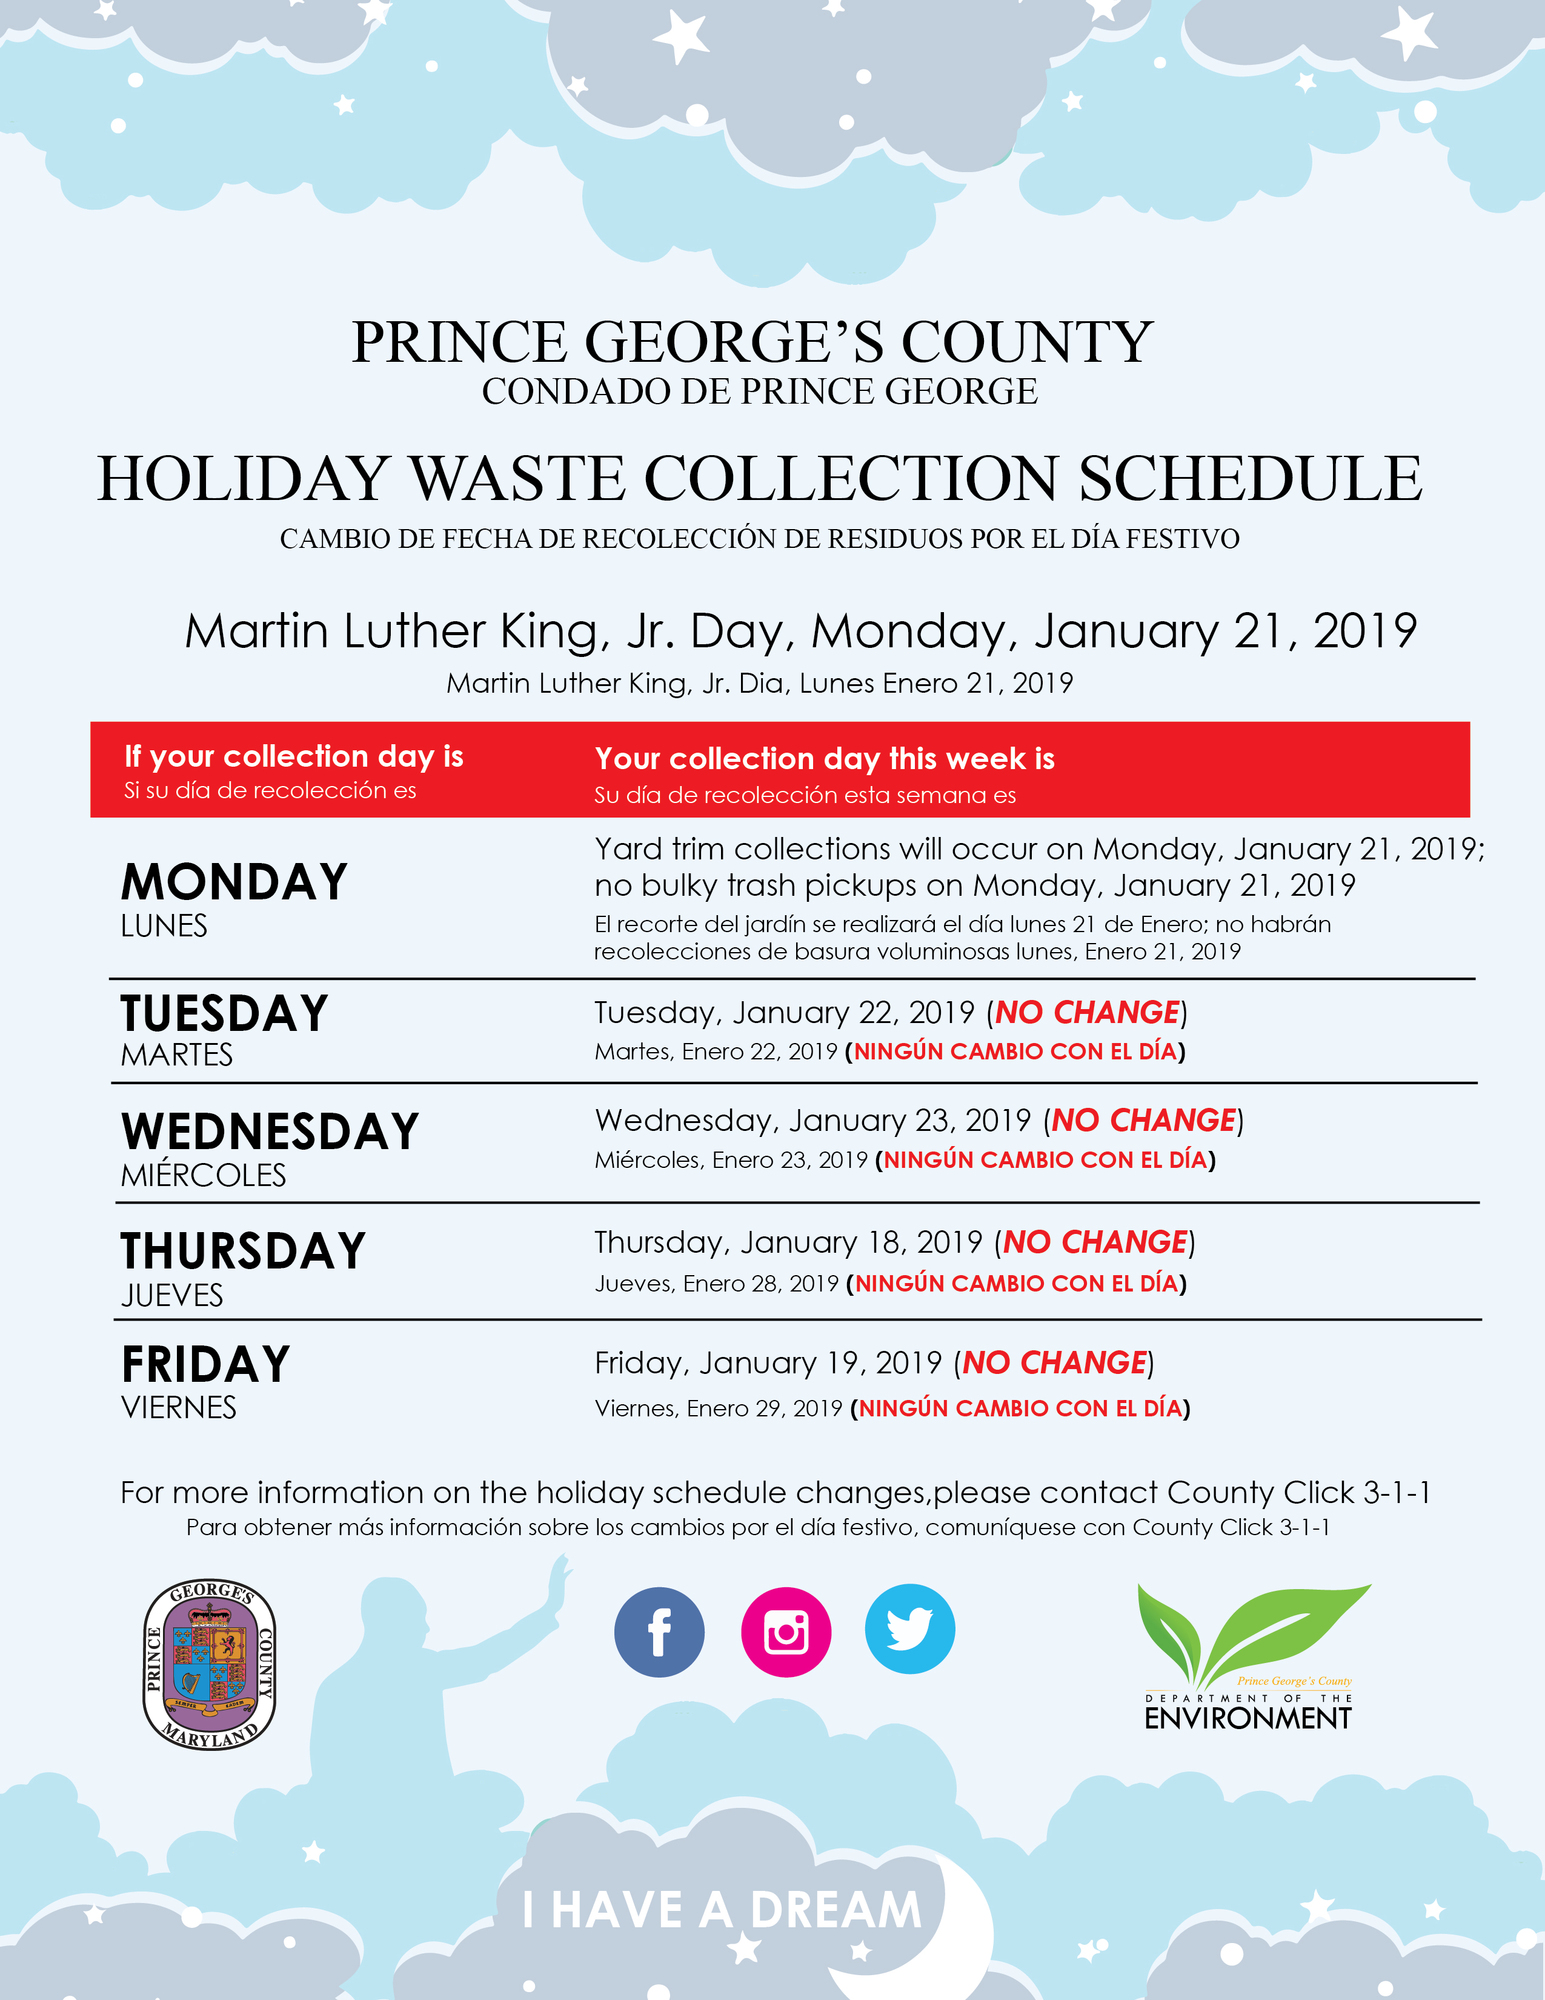 Recycling and Trash Holiday Collection Schedule for Martin Luther King